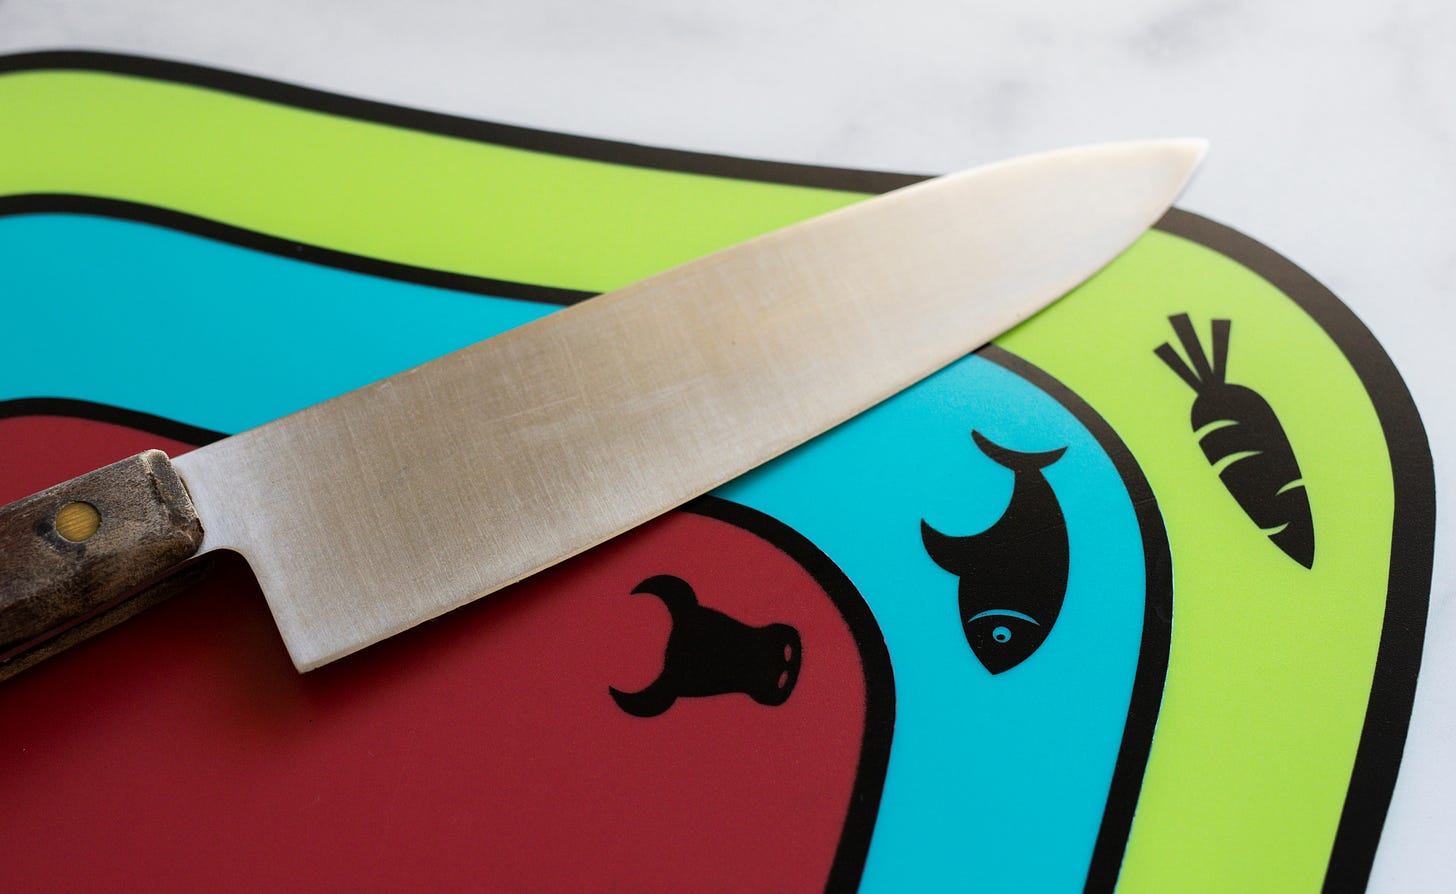 A knife laying on top of three cutting boards. Each cutting board is a different color which corresponds with a food icon to help prevent cross contamination.